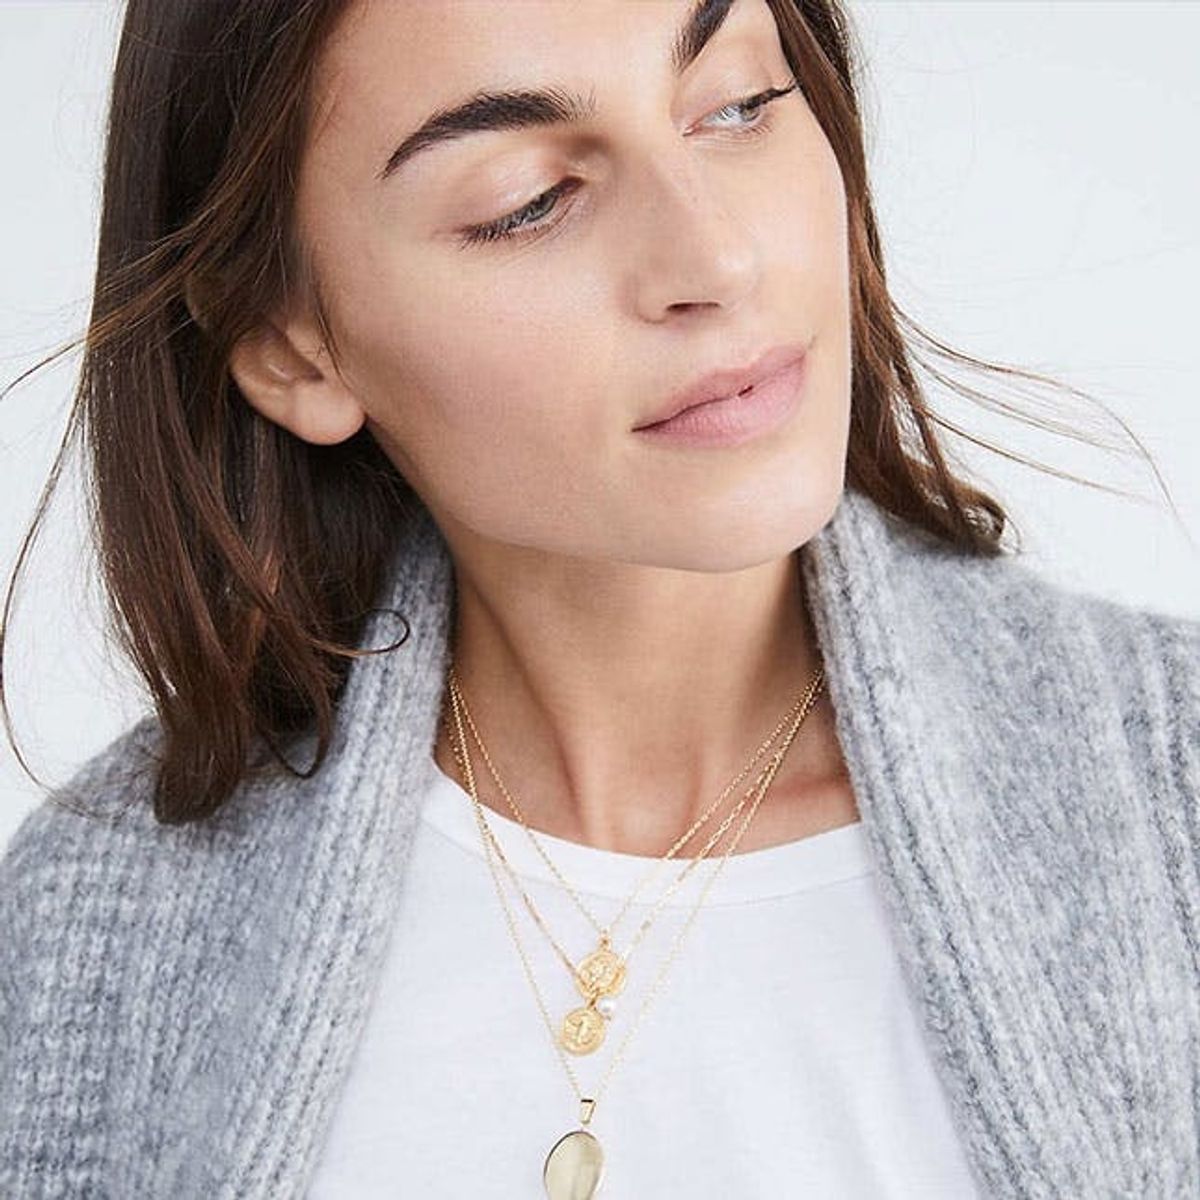 13 Lockets That Are Both Sentimental and Stylish